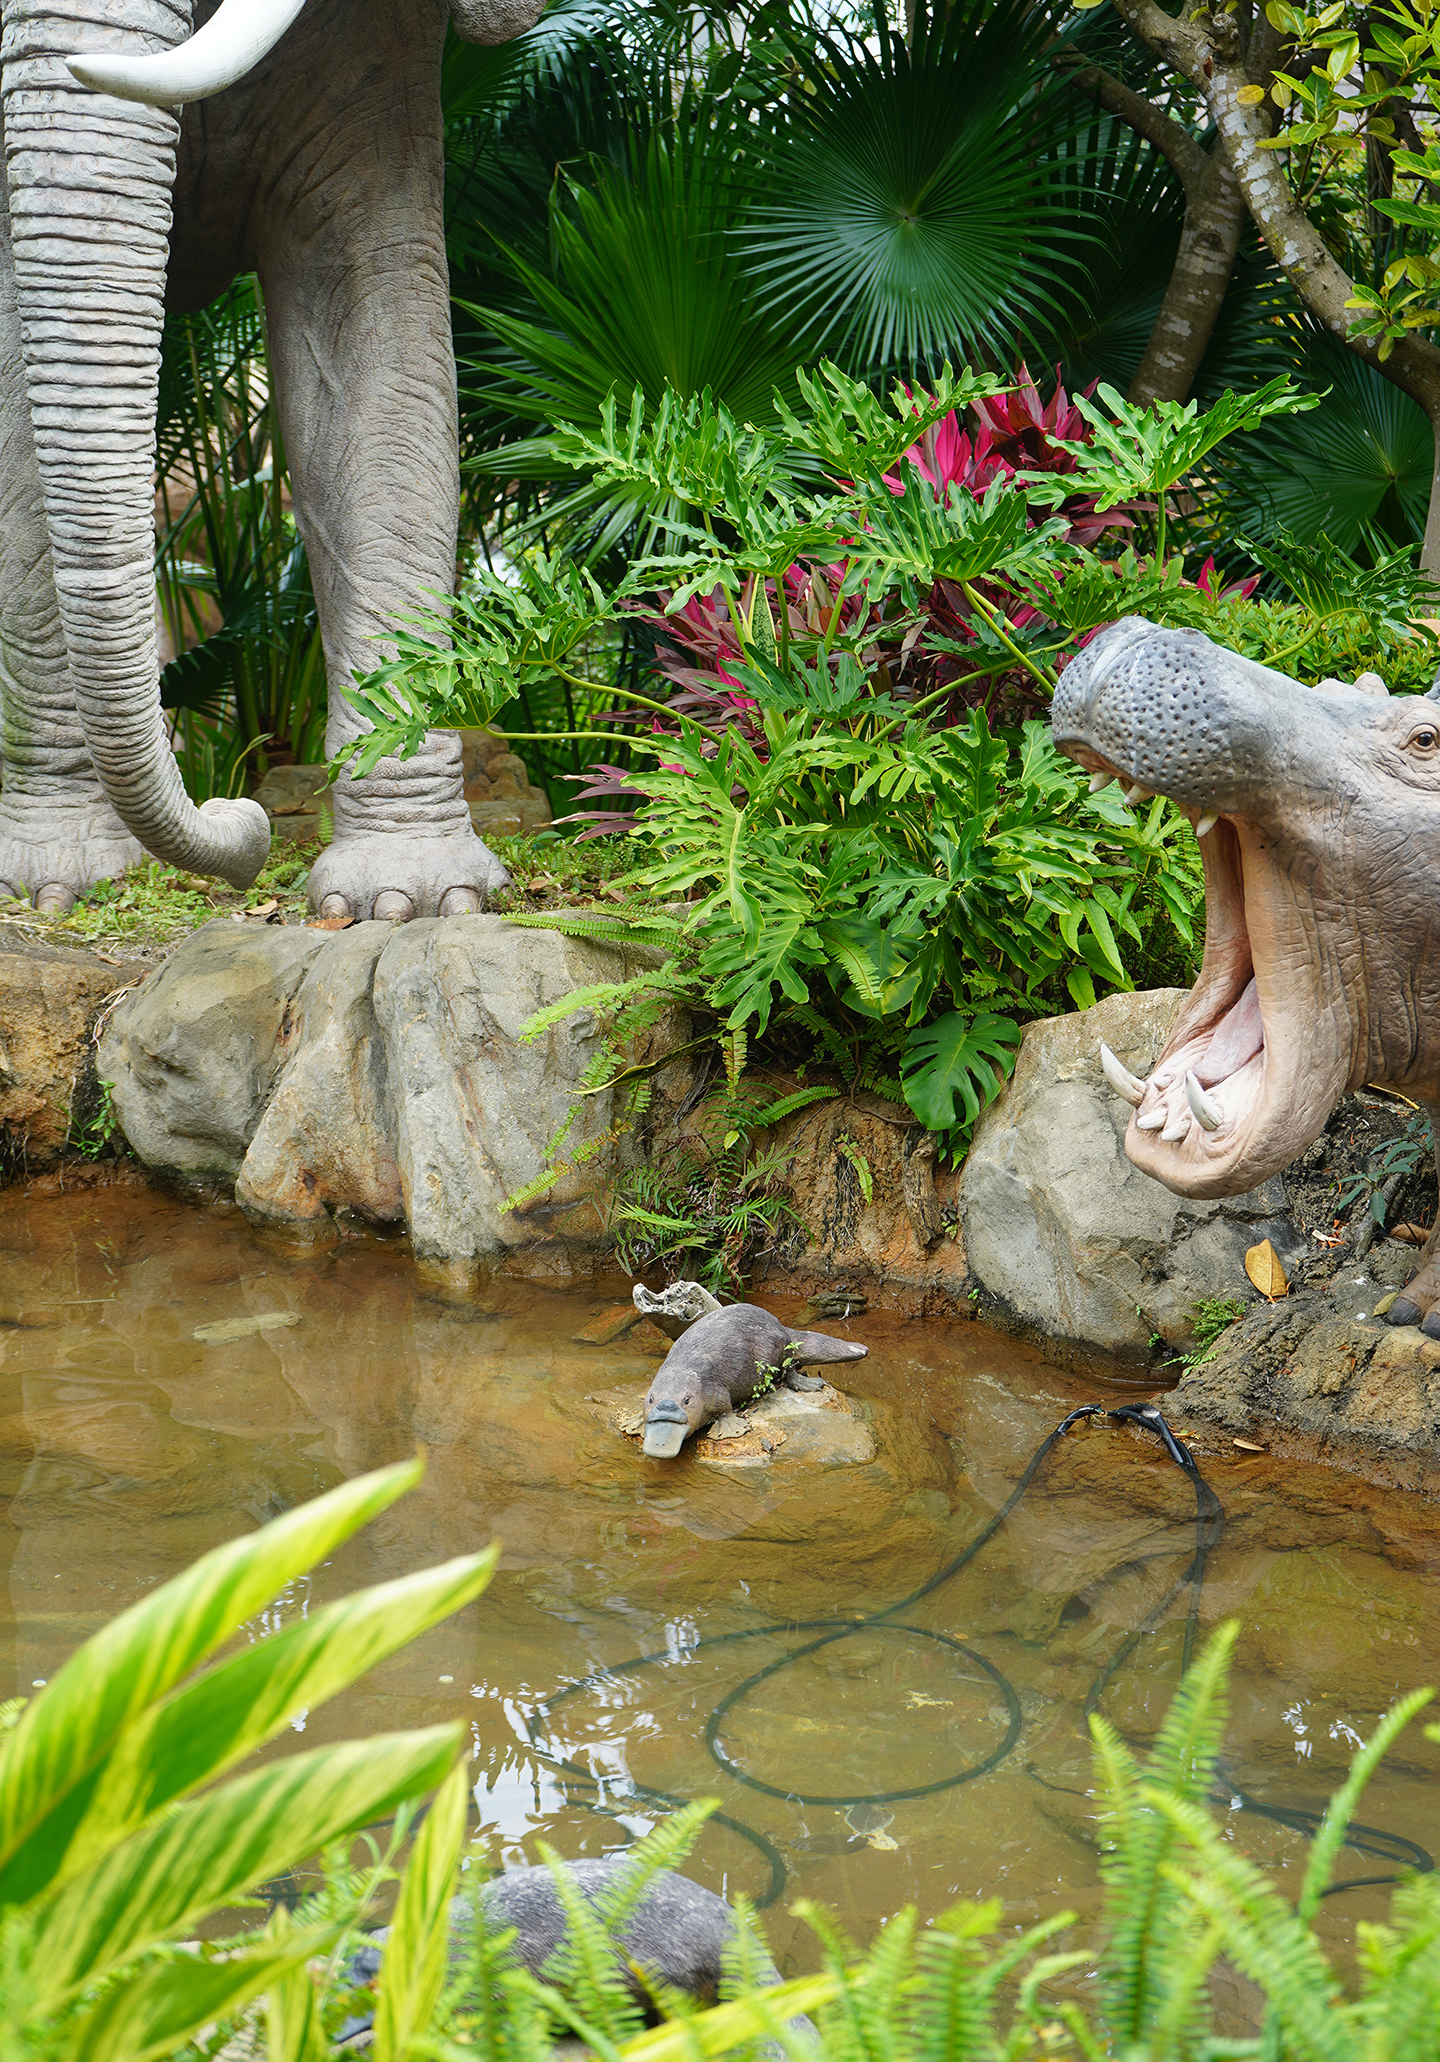 Fiberglass statues of a platypus, a hippo, and an elephant in the gardens of Noah's Ark Hong Kong